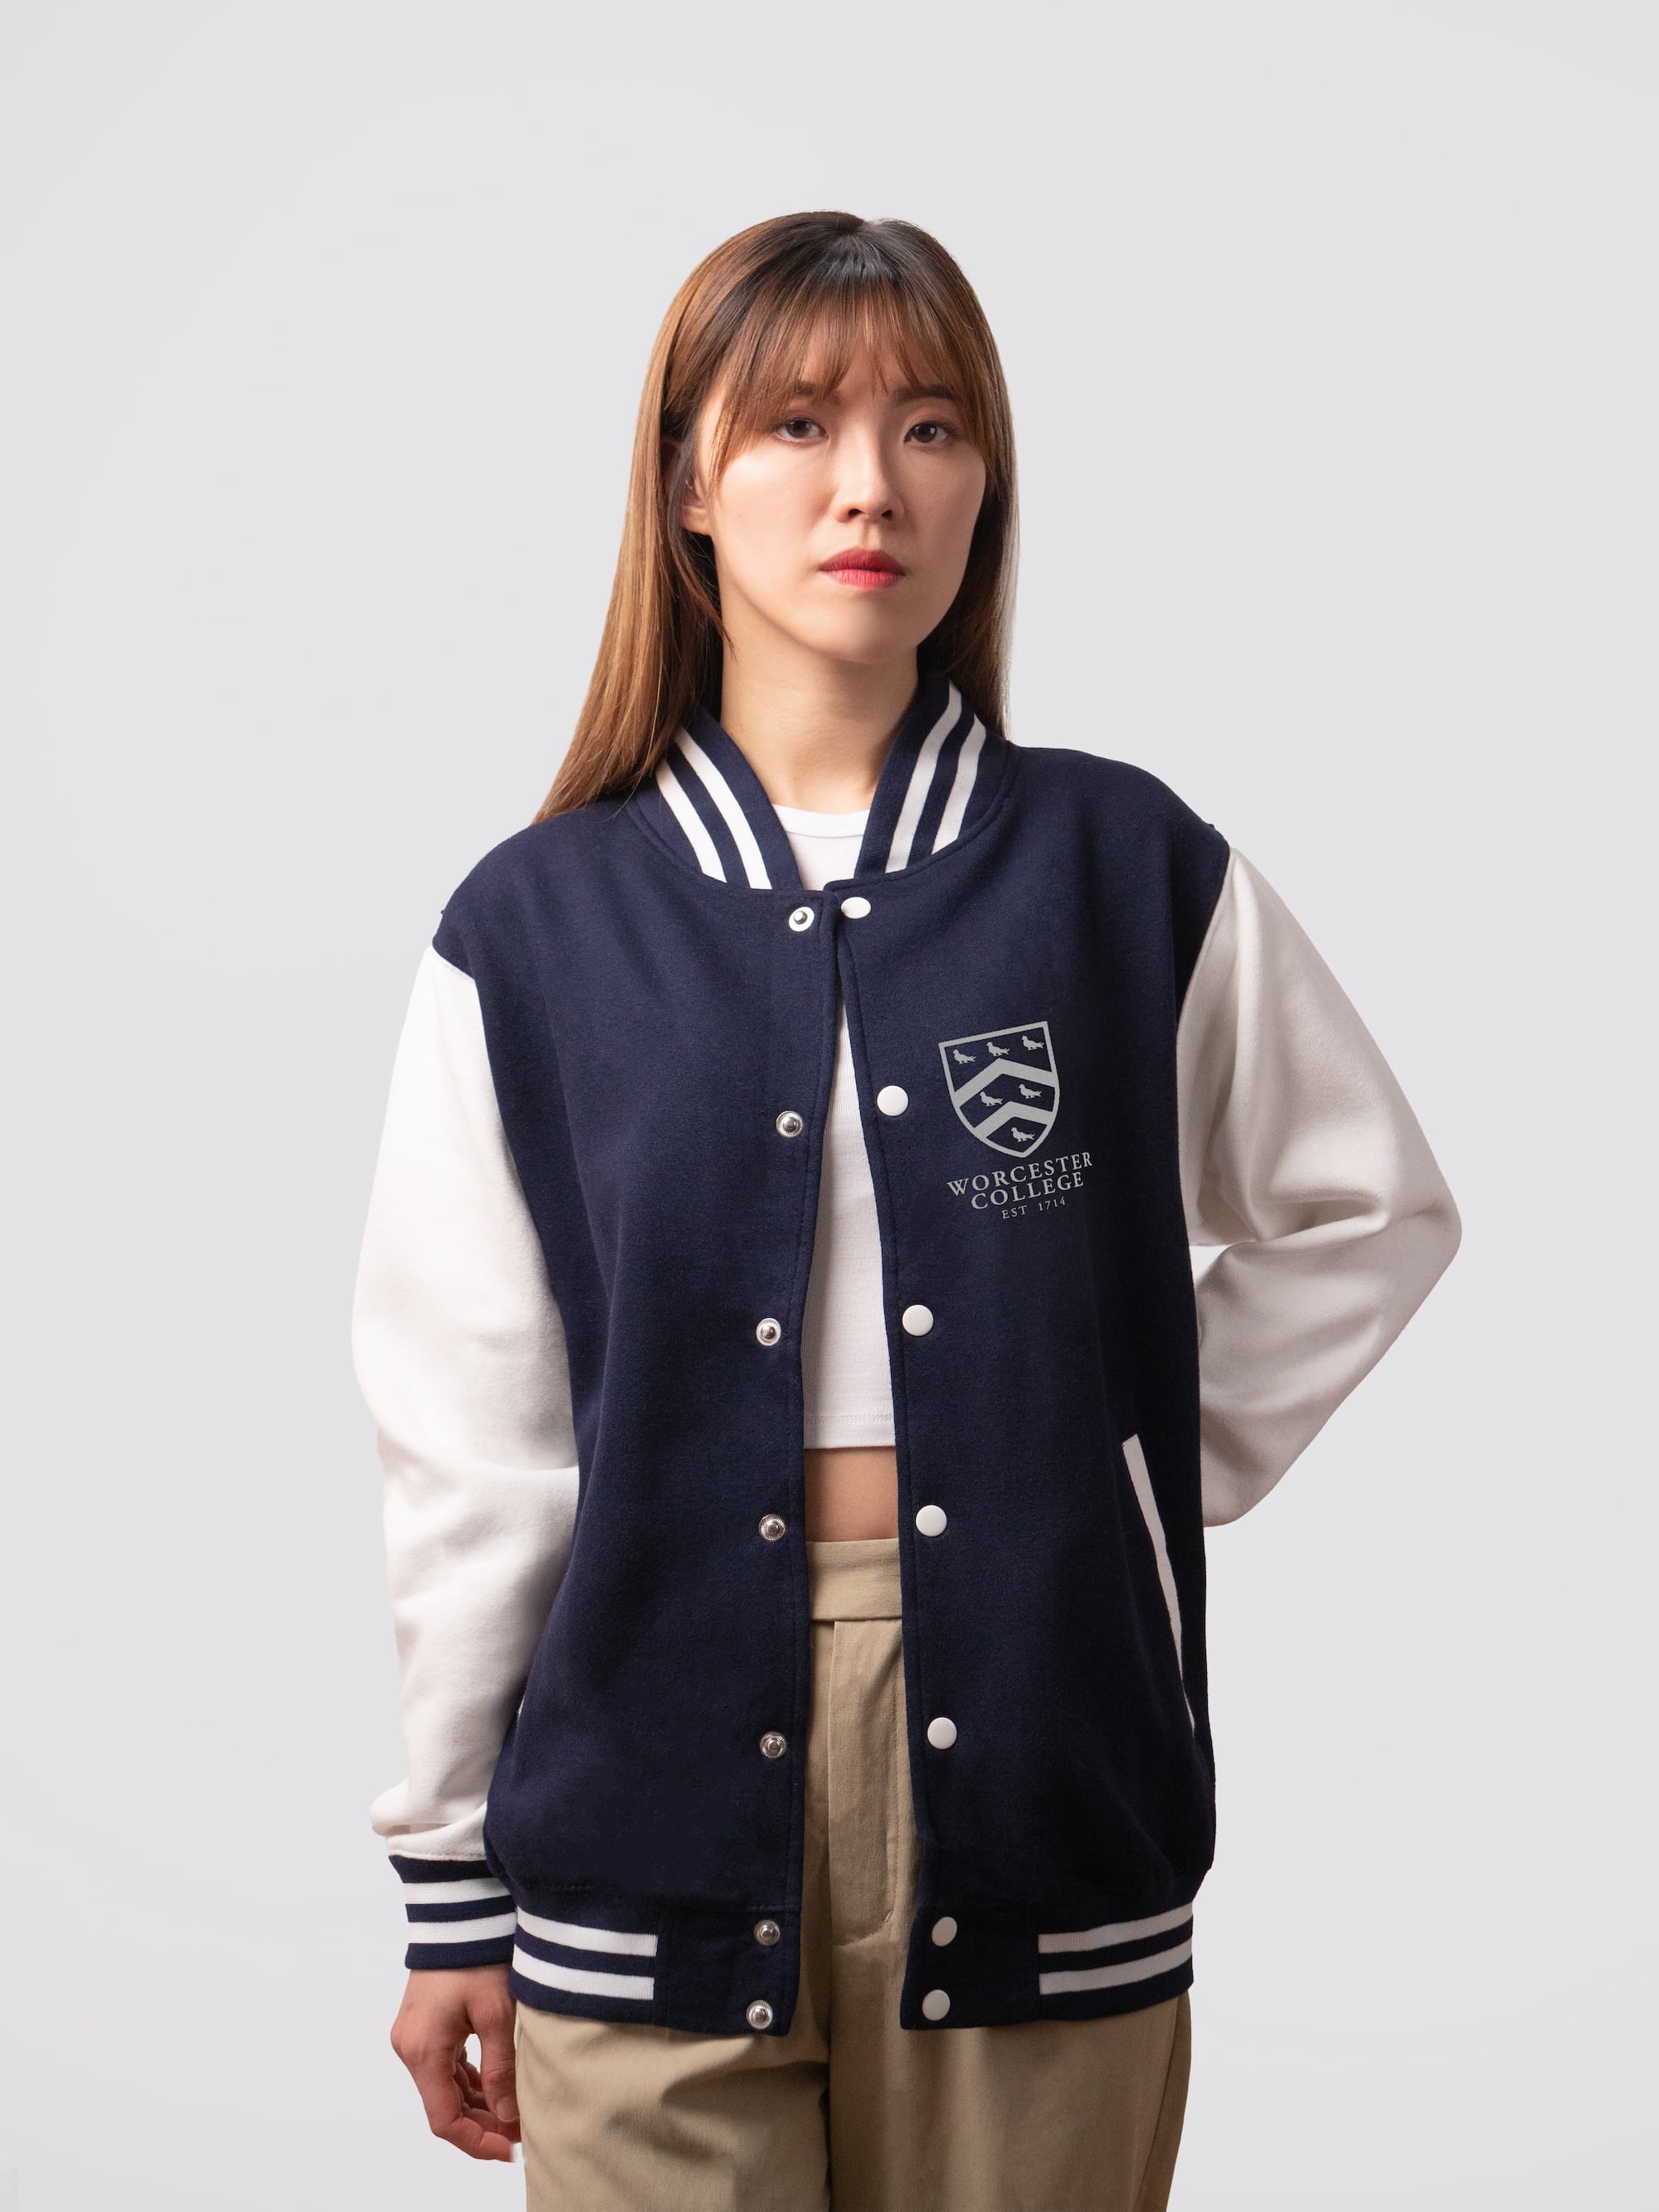 Retro style varsity jacket, with embroidered Worcester crest